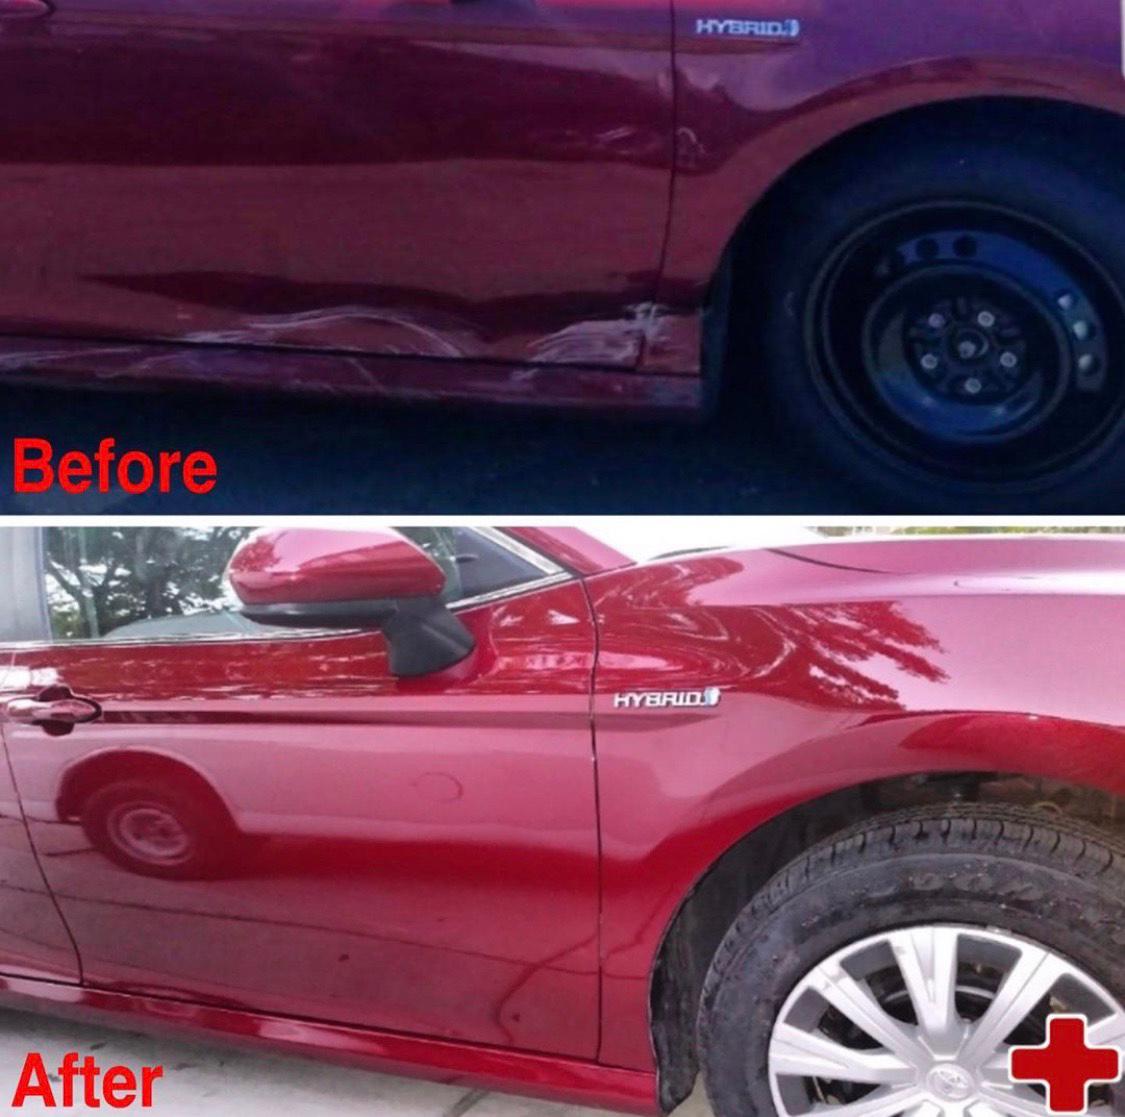 Trust Carbulance Mobile Auto Body to provide top-notch bumper repair services in San Diego. We excel in repairing and refinishing damaged bumpers, ensuring they not only look great but also offer the necessary protection for your vehicle.